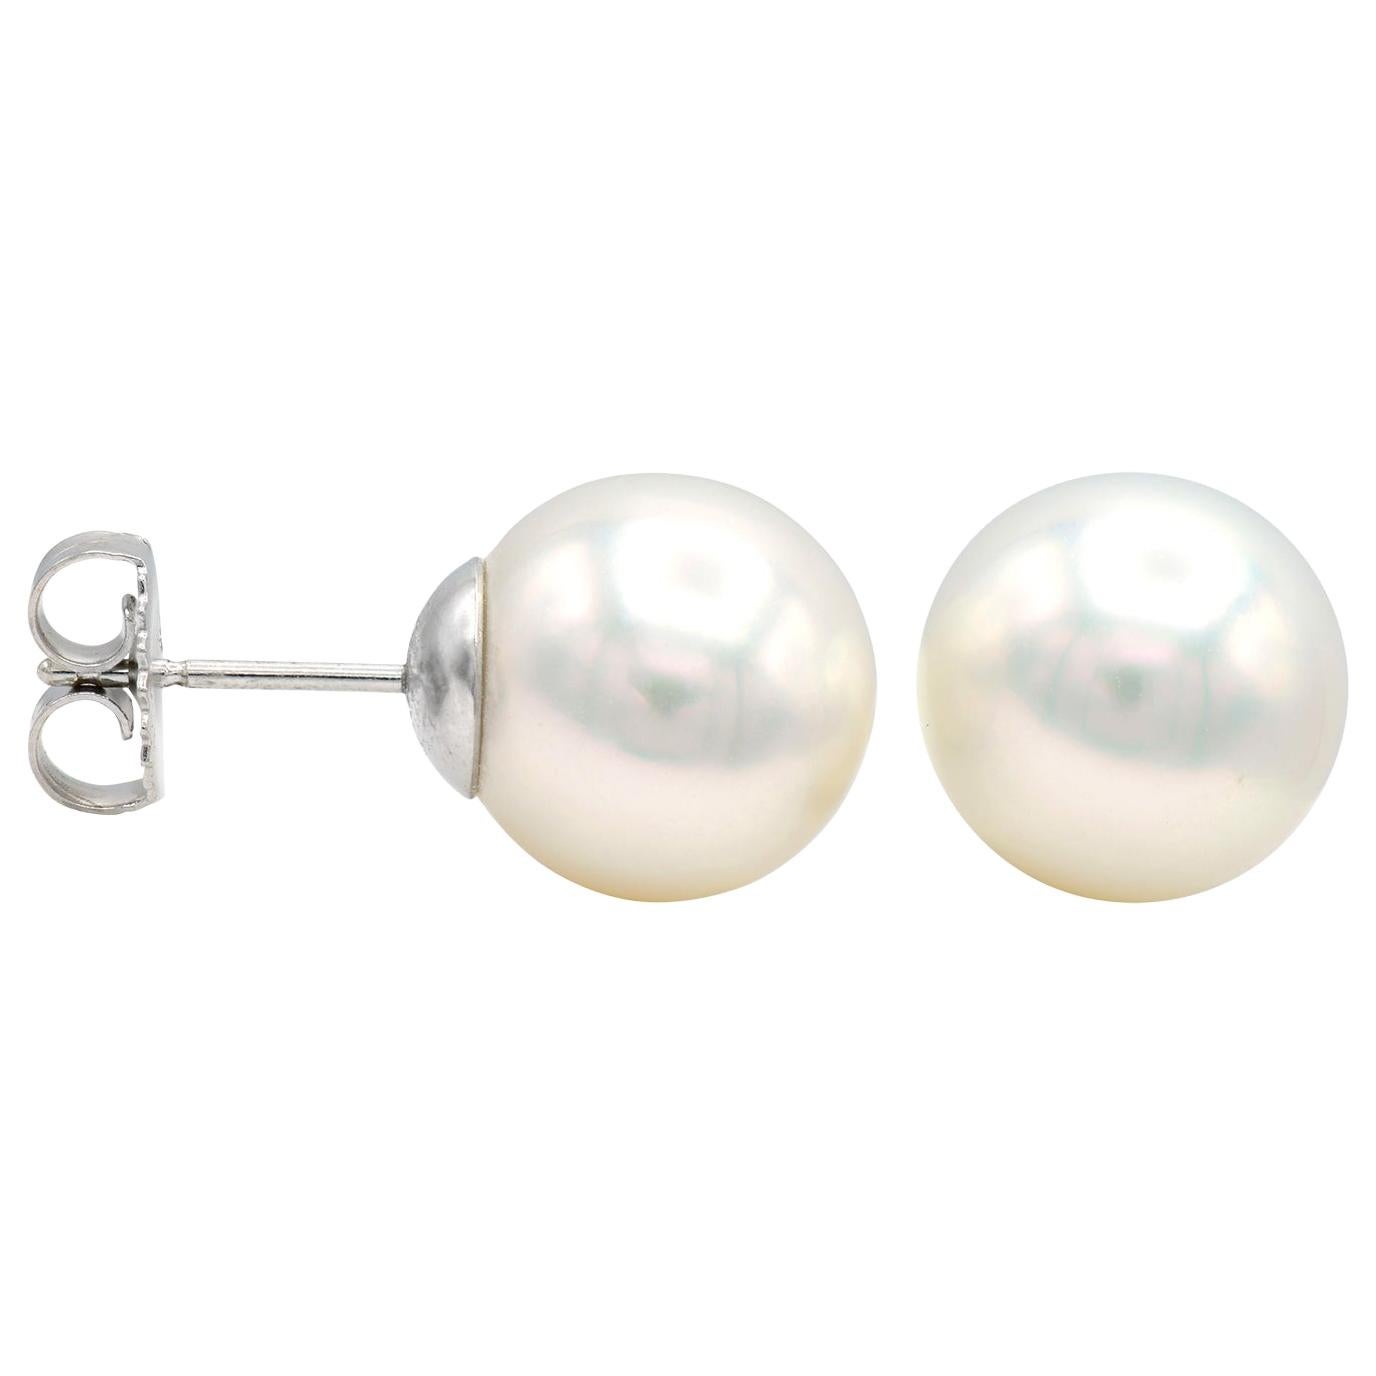 Freshwater Pearl Stud Earrings with 14 Karat White Gold Post and Backs